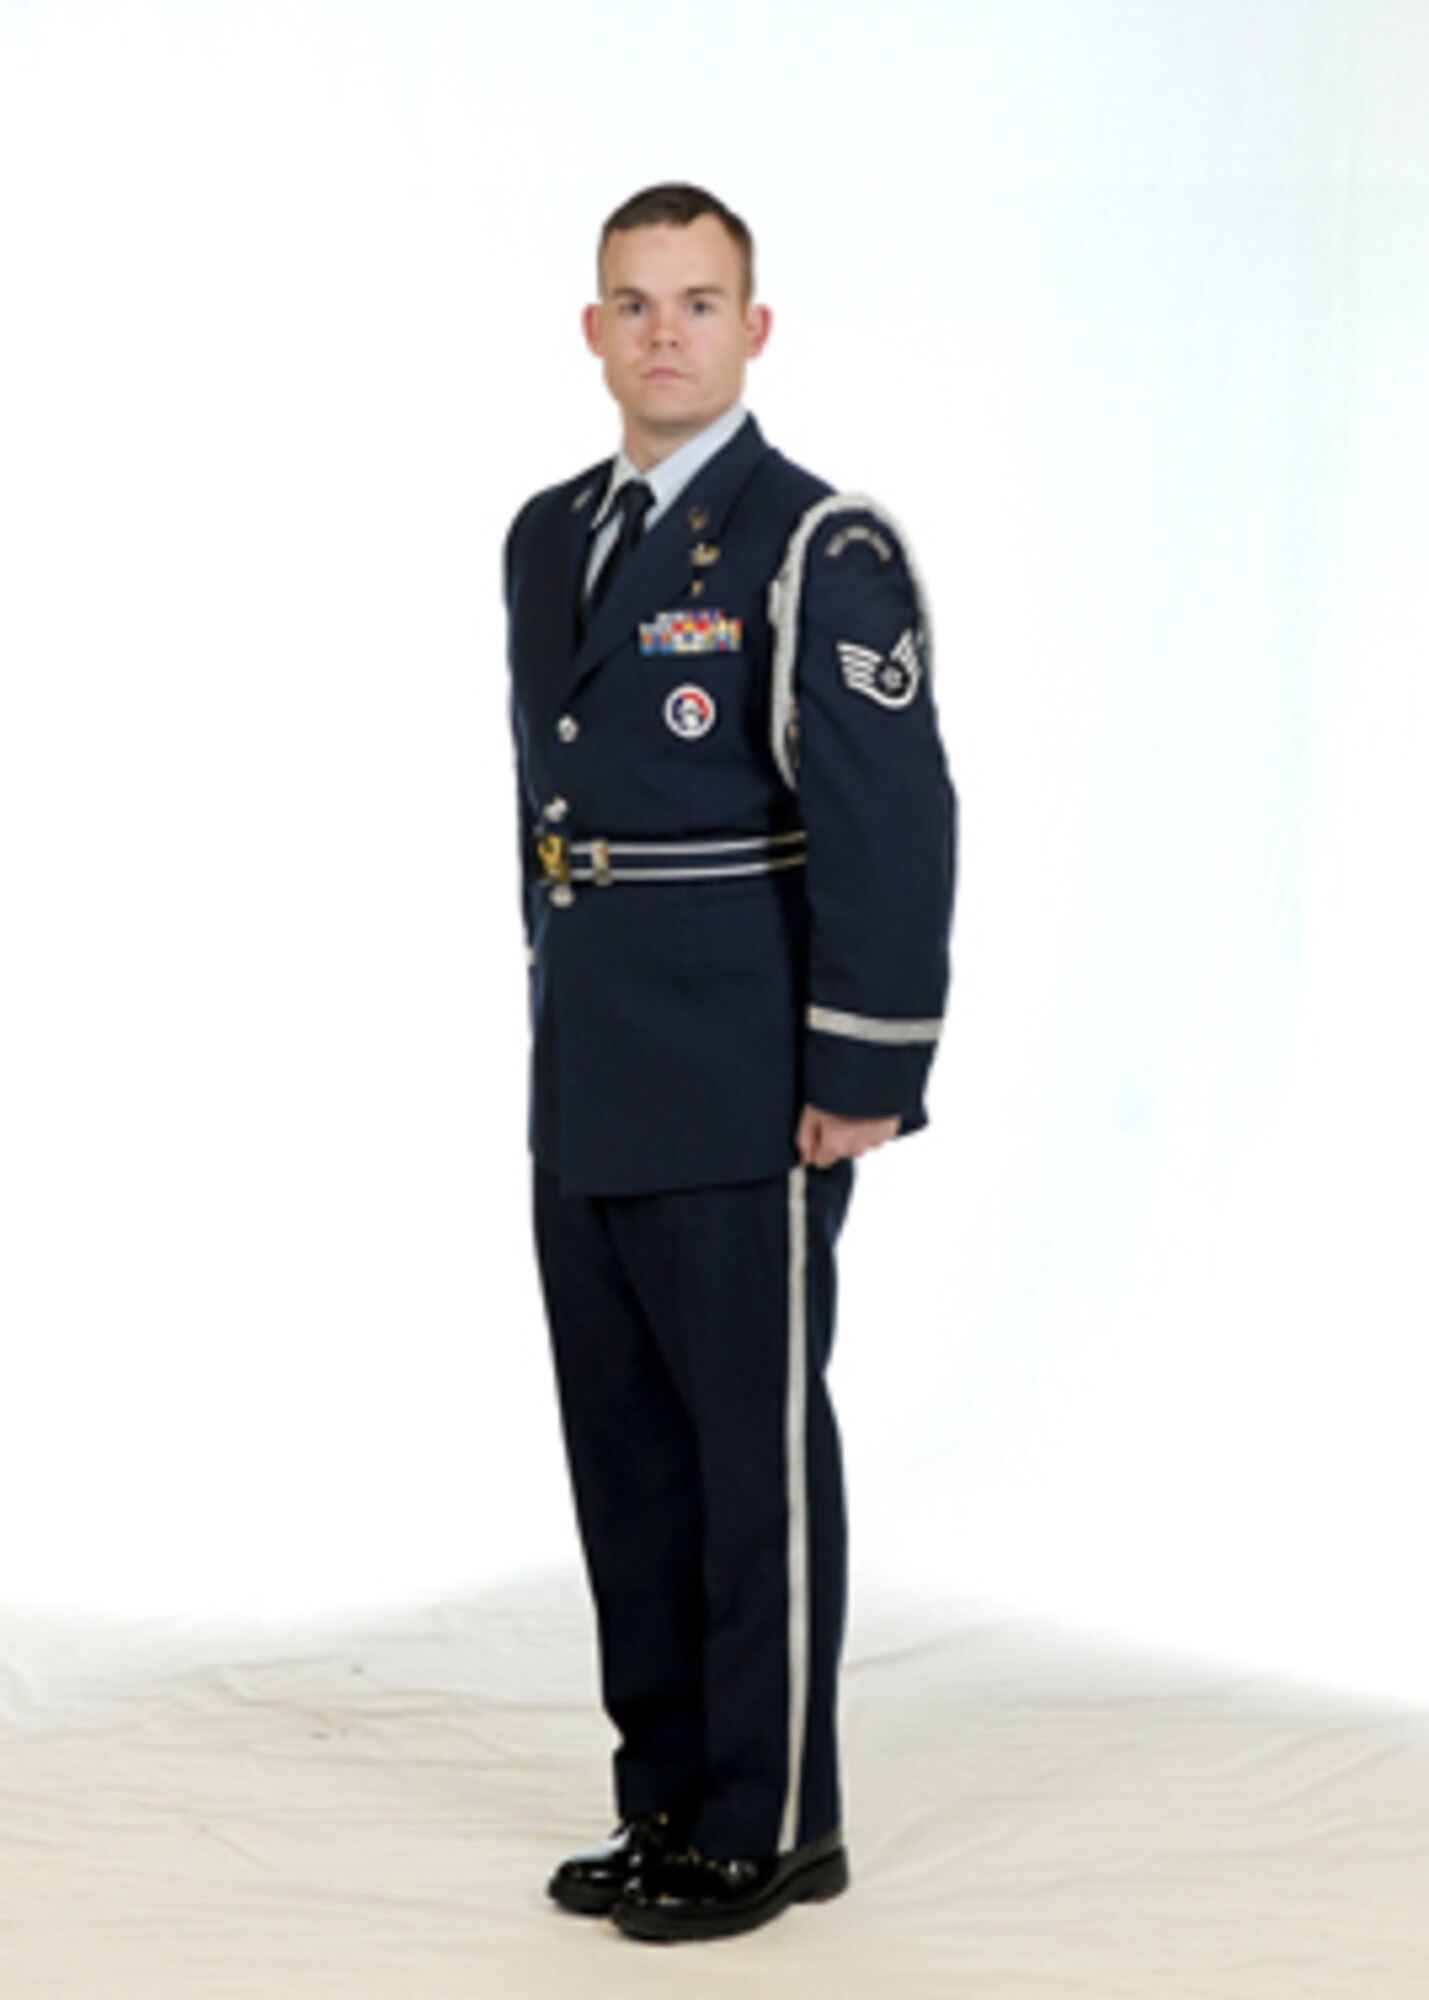 Staff Sgt. Richard Burns, NY Air National Guard Honor Guard Manager of the Year